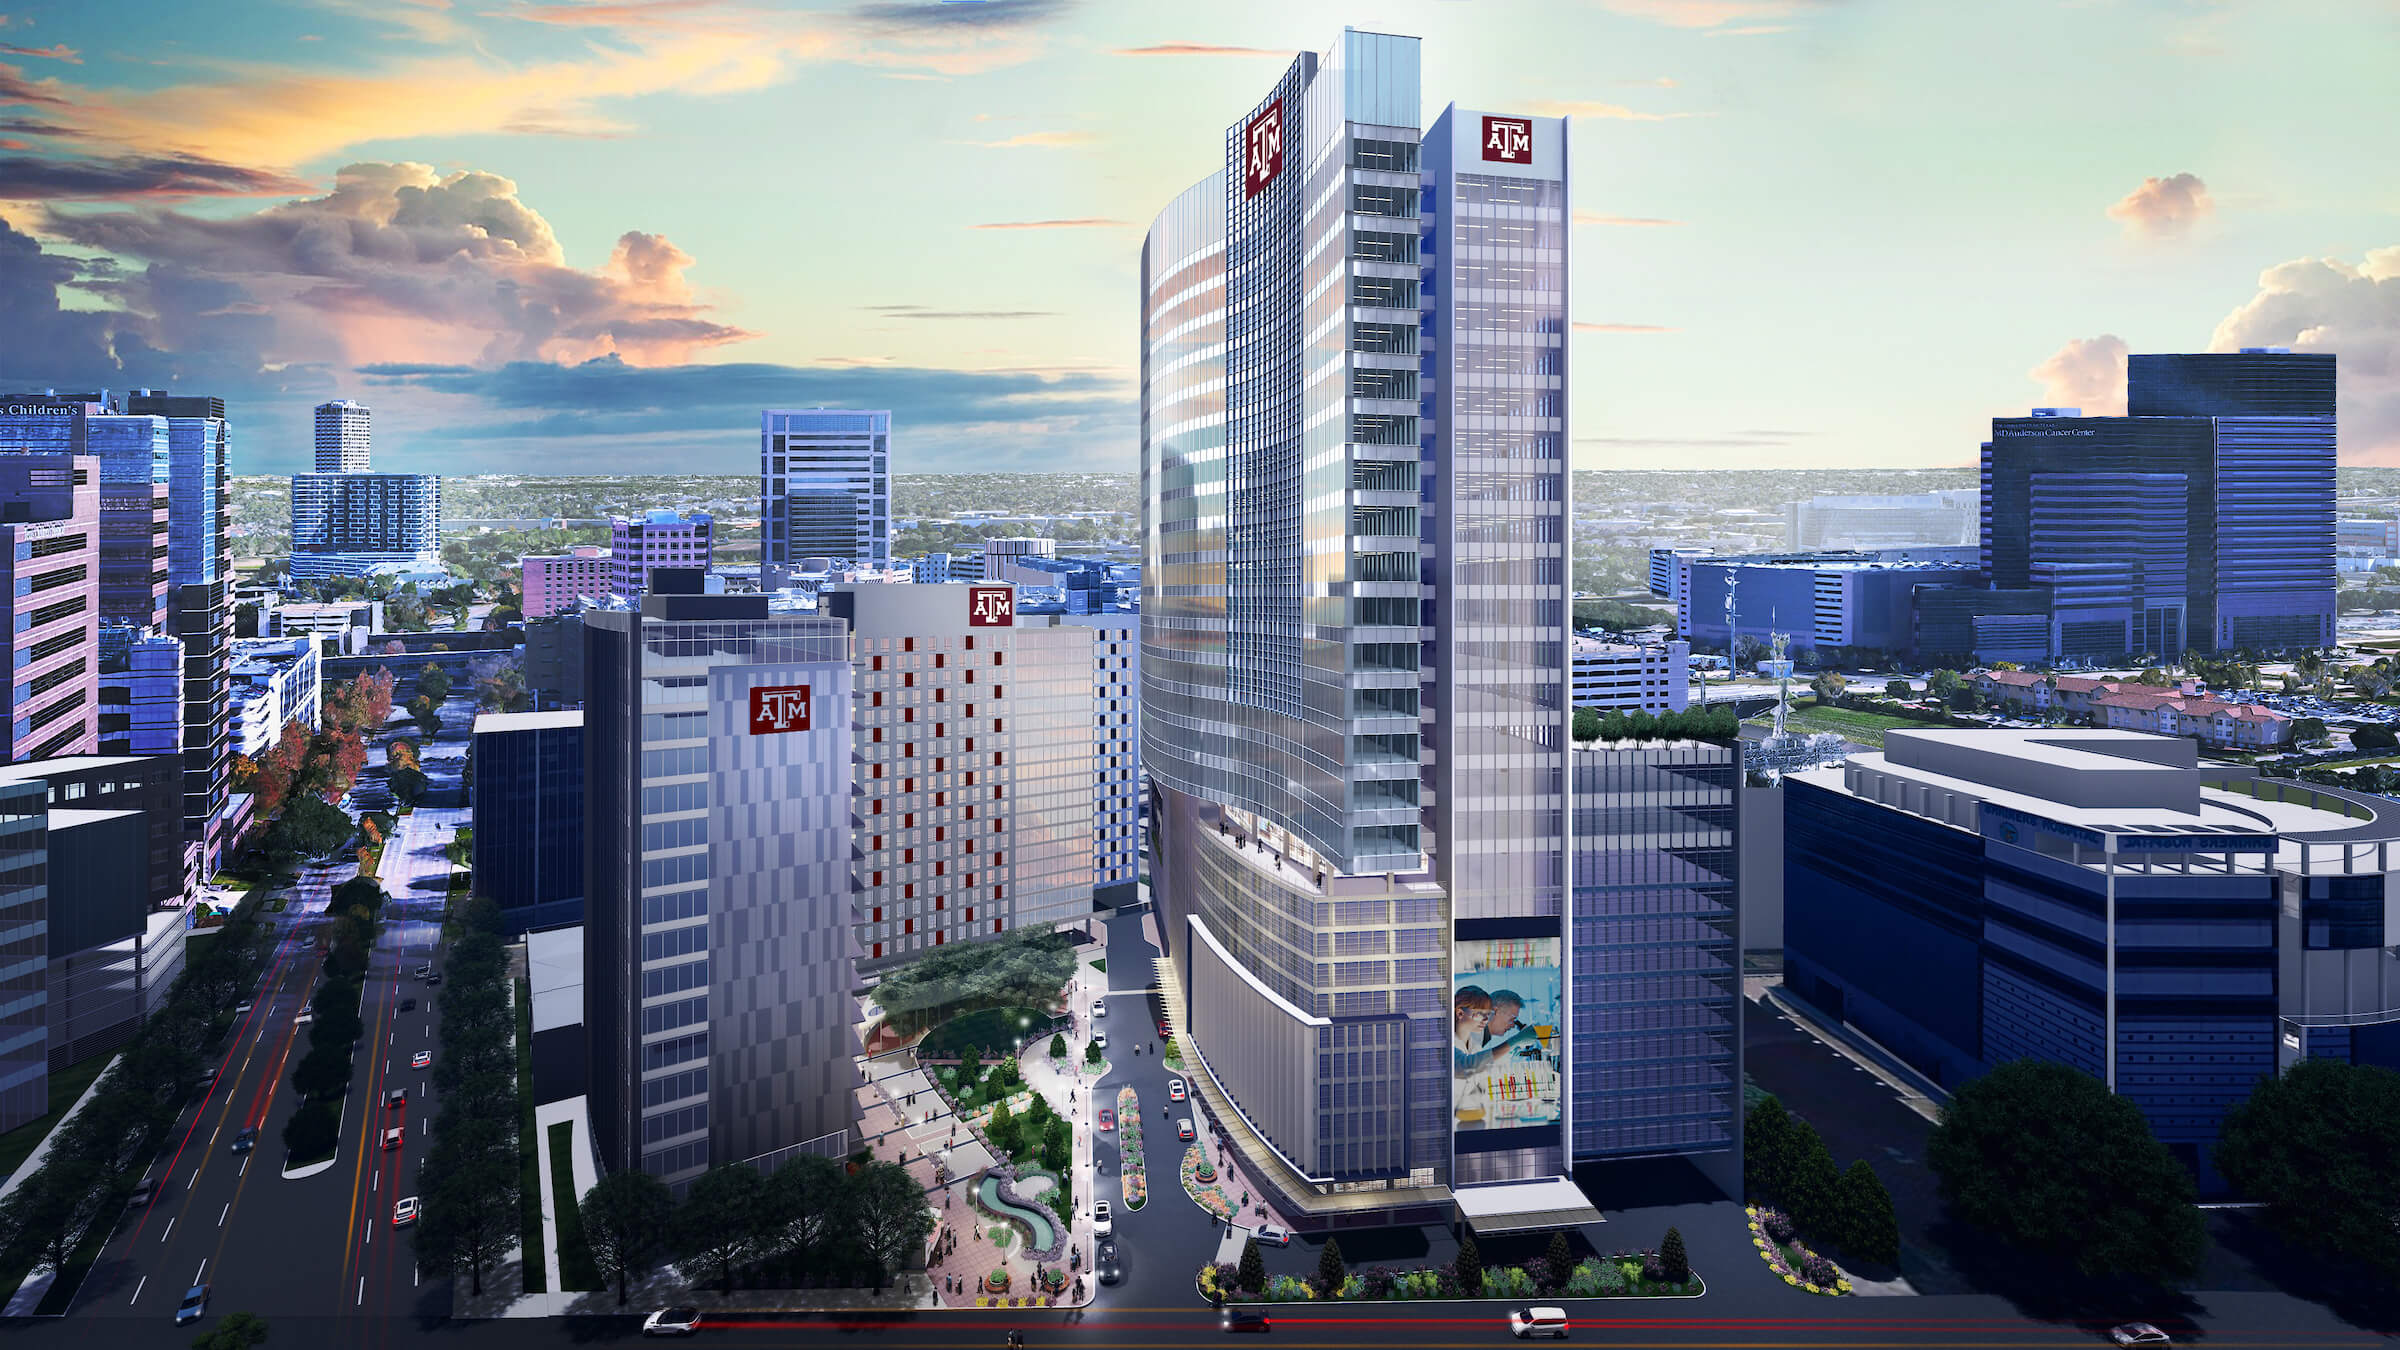 Rendering of the Texas A&M University complex in Houston's Texas Medical Center announced on Feb. 20, 2020. (Courtesy photo)